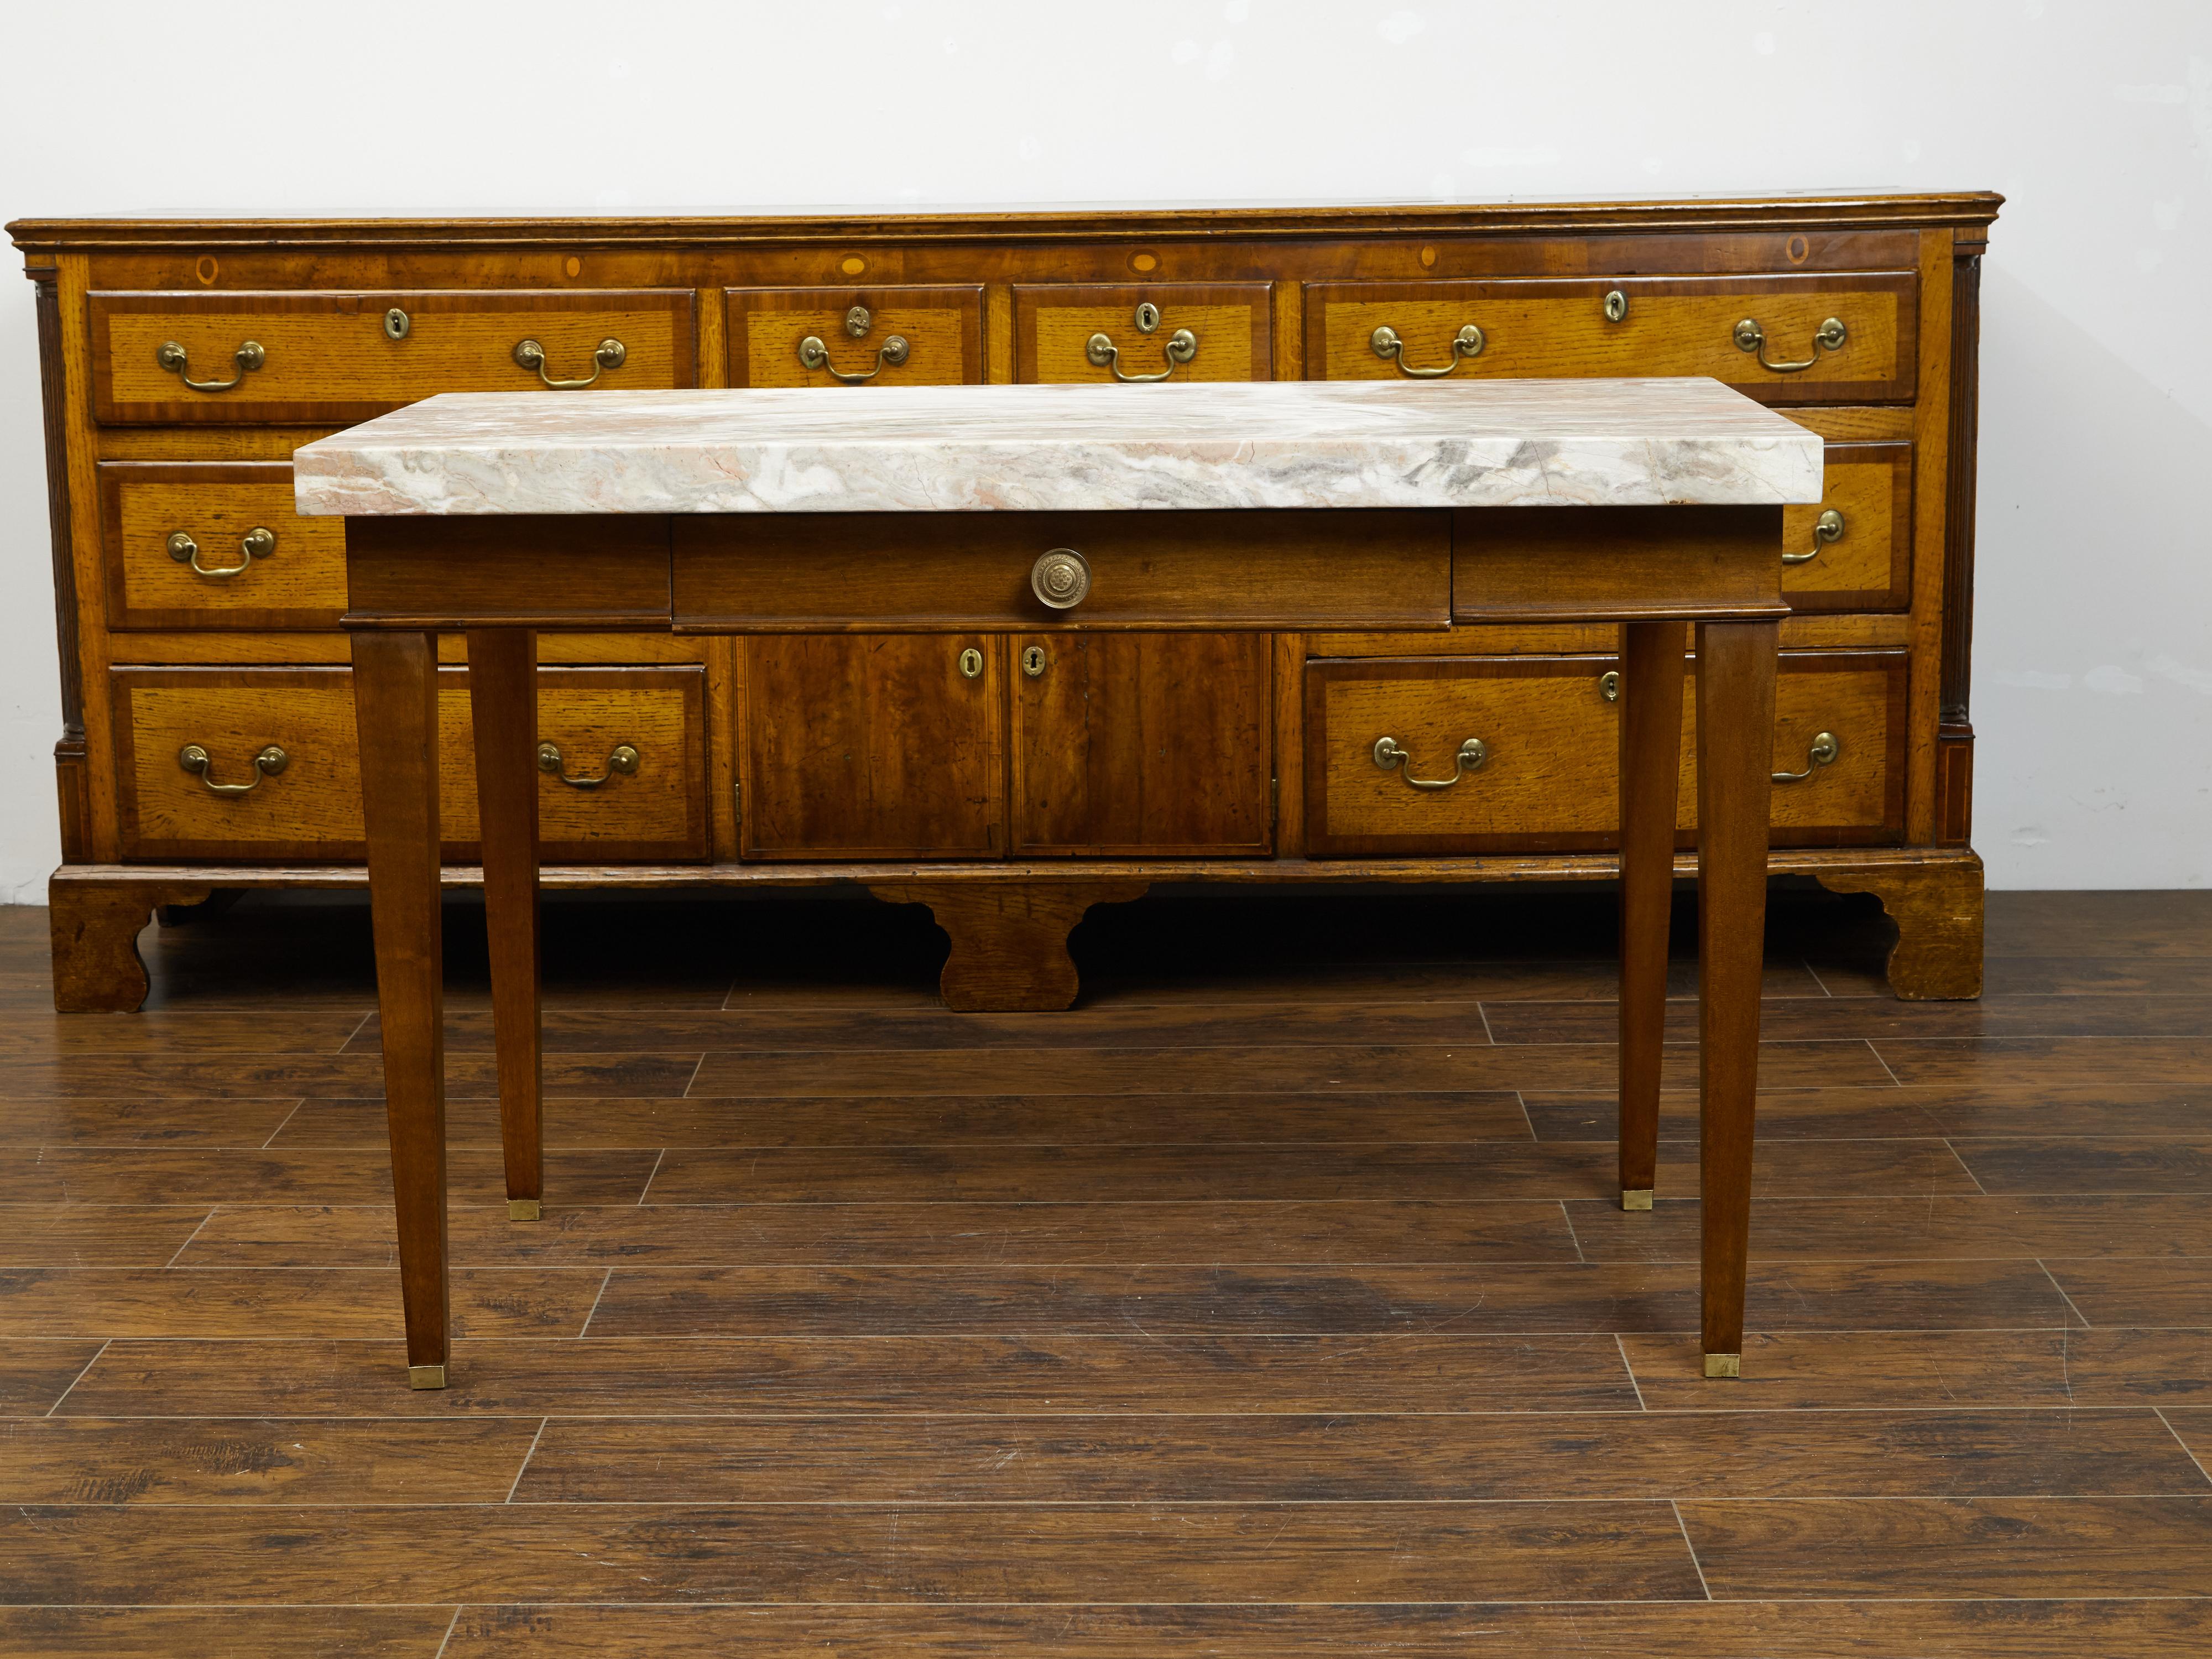 A French walnut table from the 19th century, with marble top and single drawer. Created in France during the 19th century, this walnut table features a rectangular variegated marble top sitting above a single drawer fitted with a circular brass